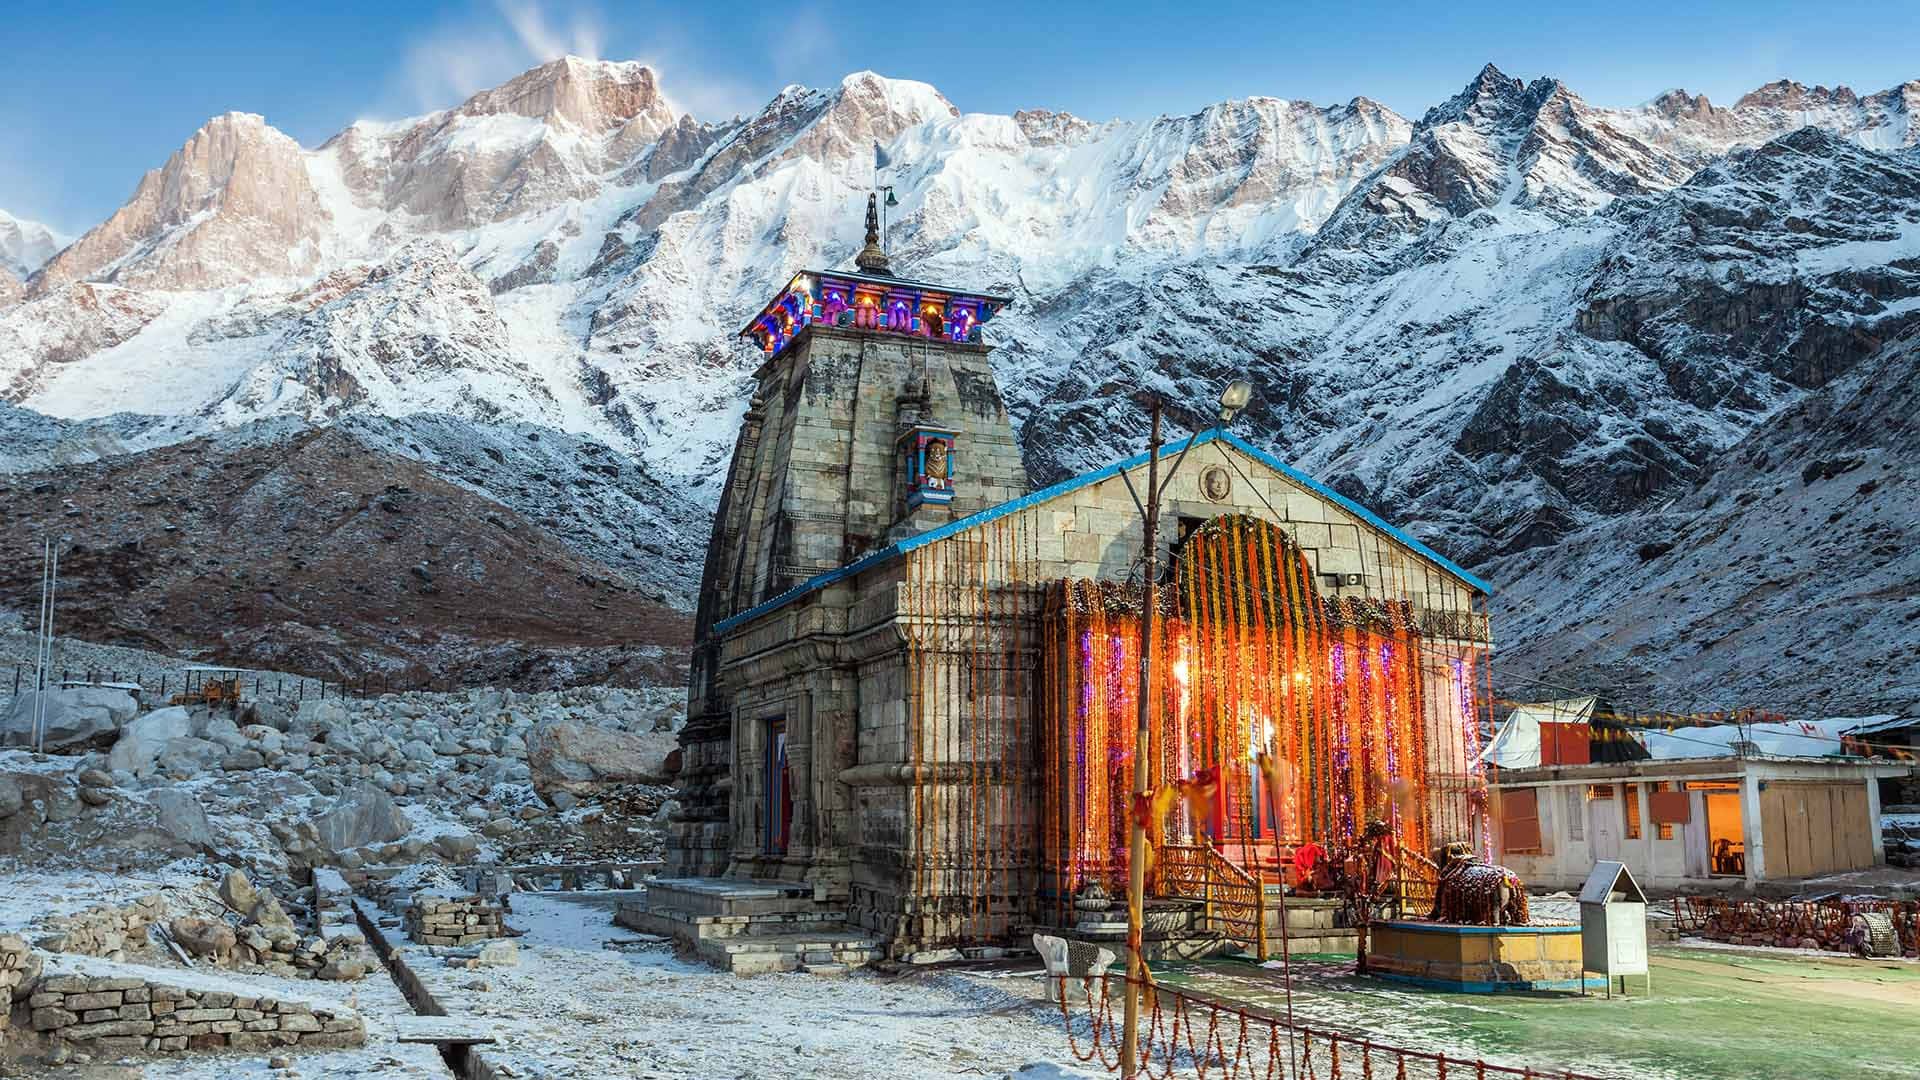 A Temple In The Mountains With Snow Surrounding It